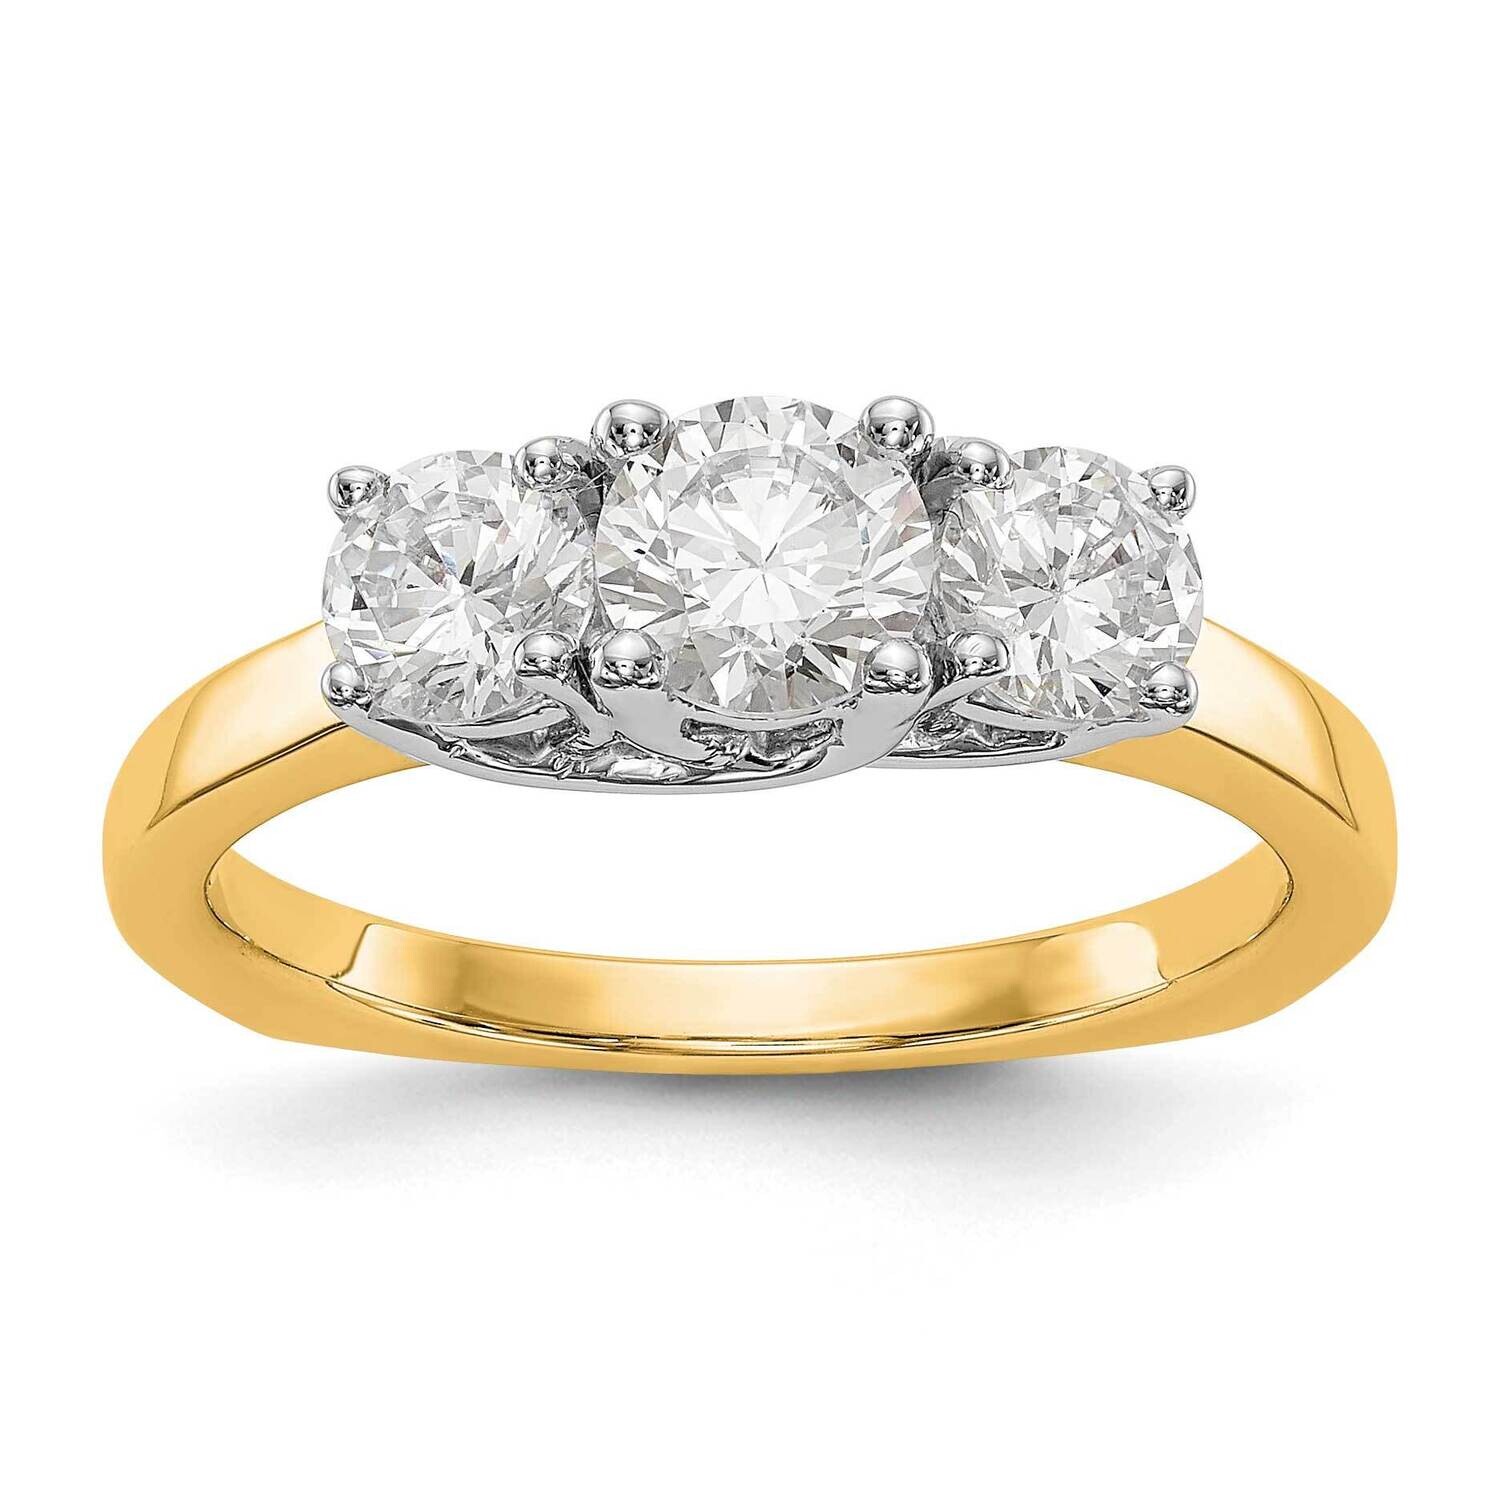 3-Stone Holds 1/2 Carat 5.2mm Round Center 2-4.5mm Round Sides Engagement Ring Mounting 14k Two-Tone Gold RM2953E-050_070-YWAA